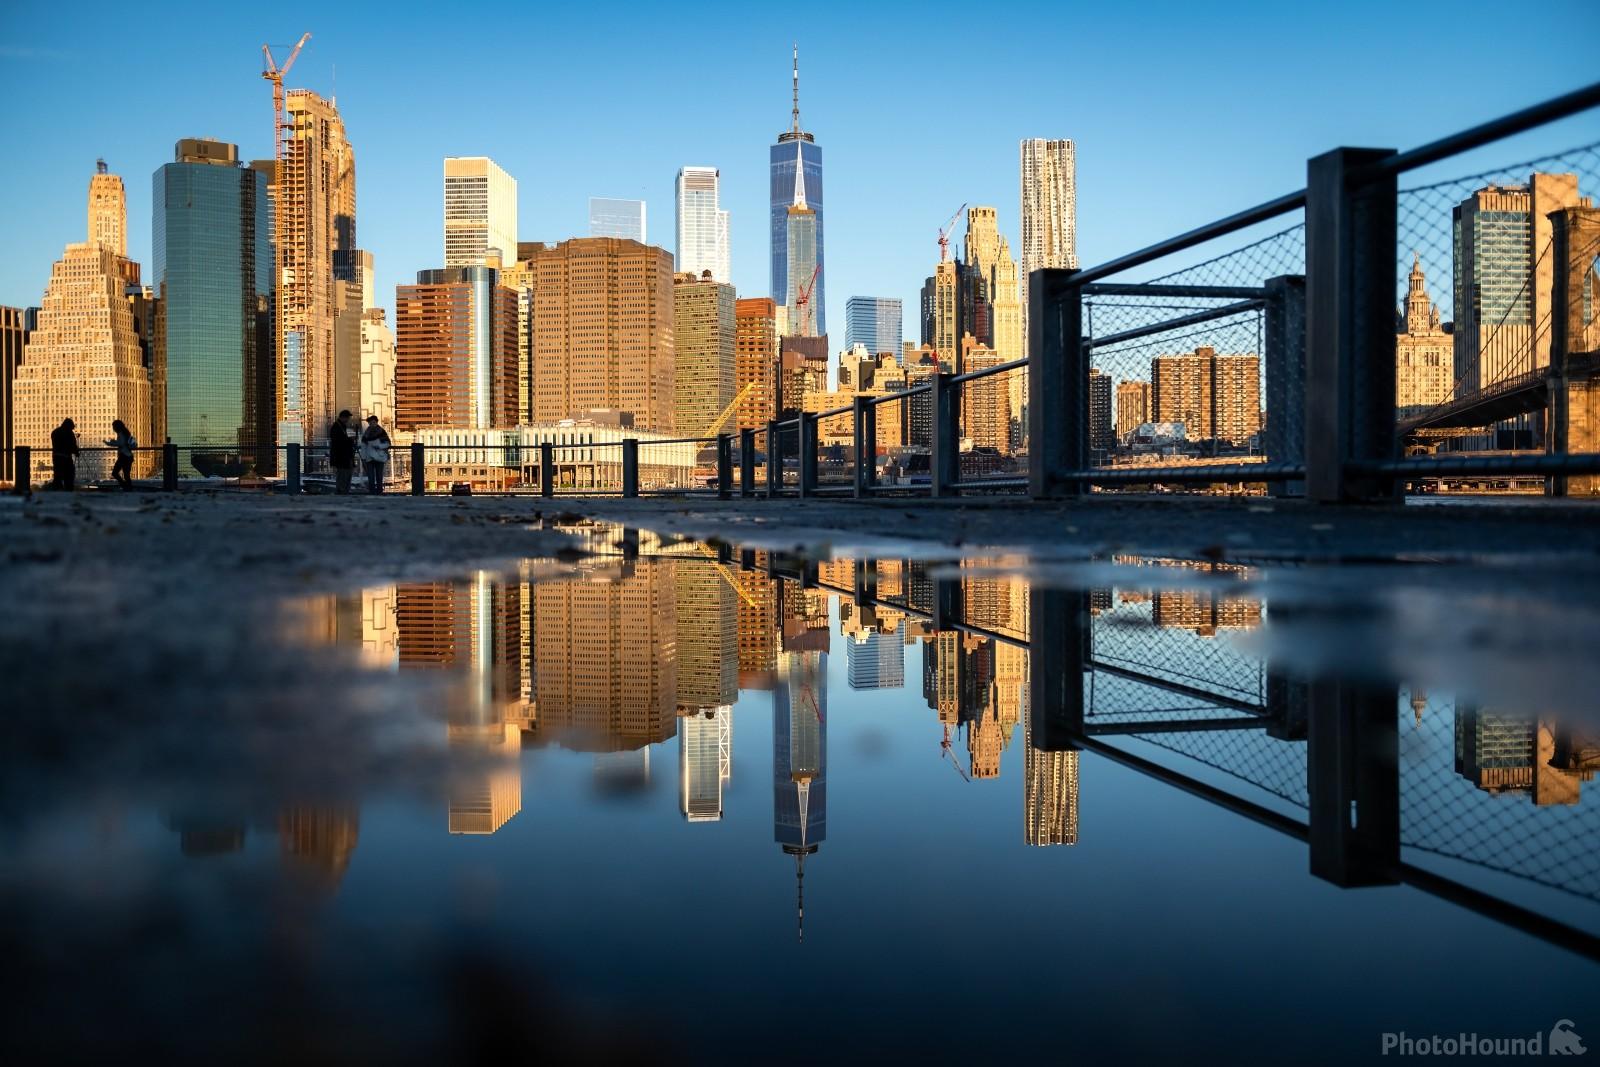 Image of Lower Manhattan panorama from Pier 1 by VOJTa Herout